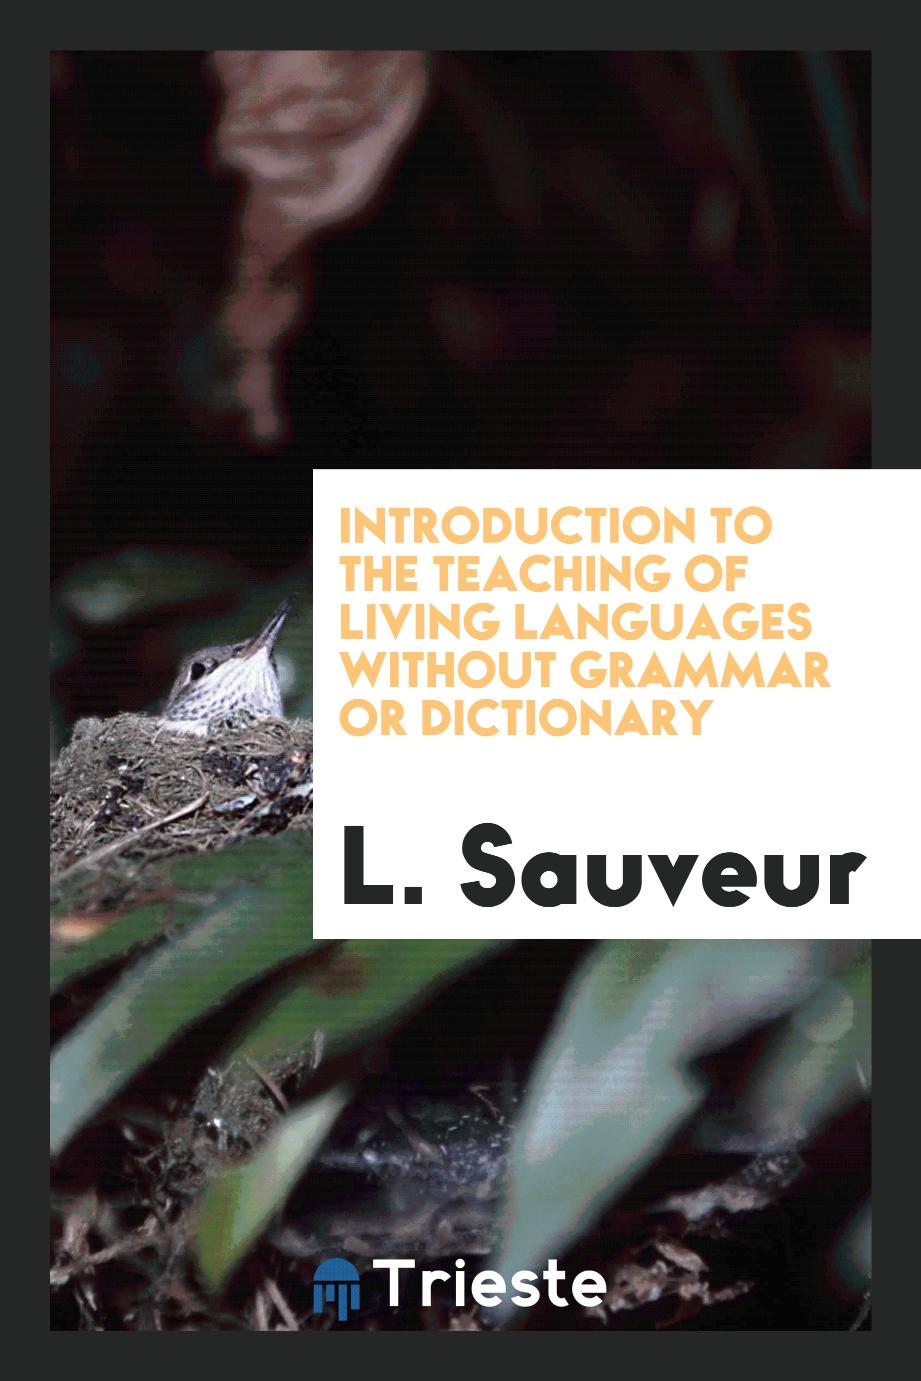 Introduction to the Teaching of Living Languages Without Grammar or Dictionary